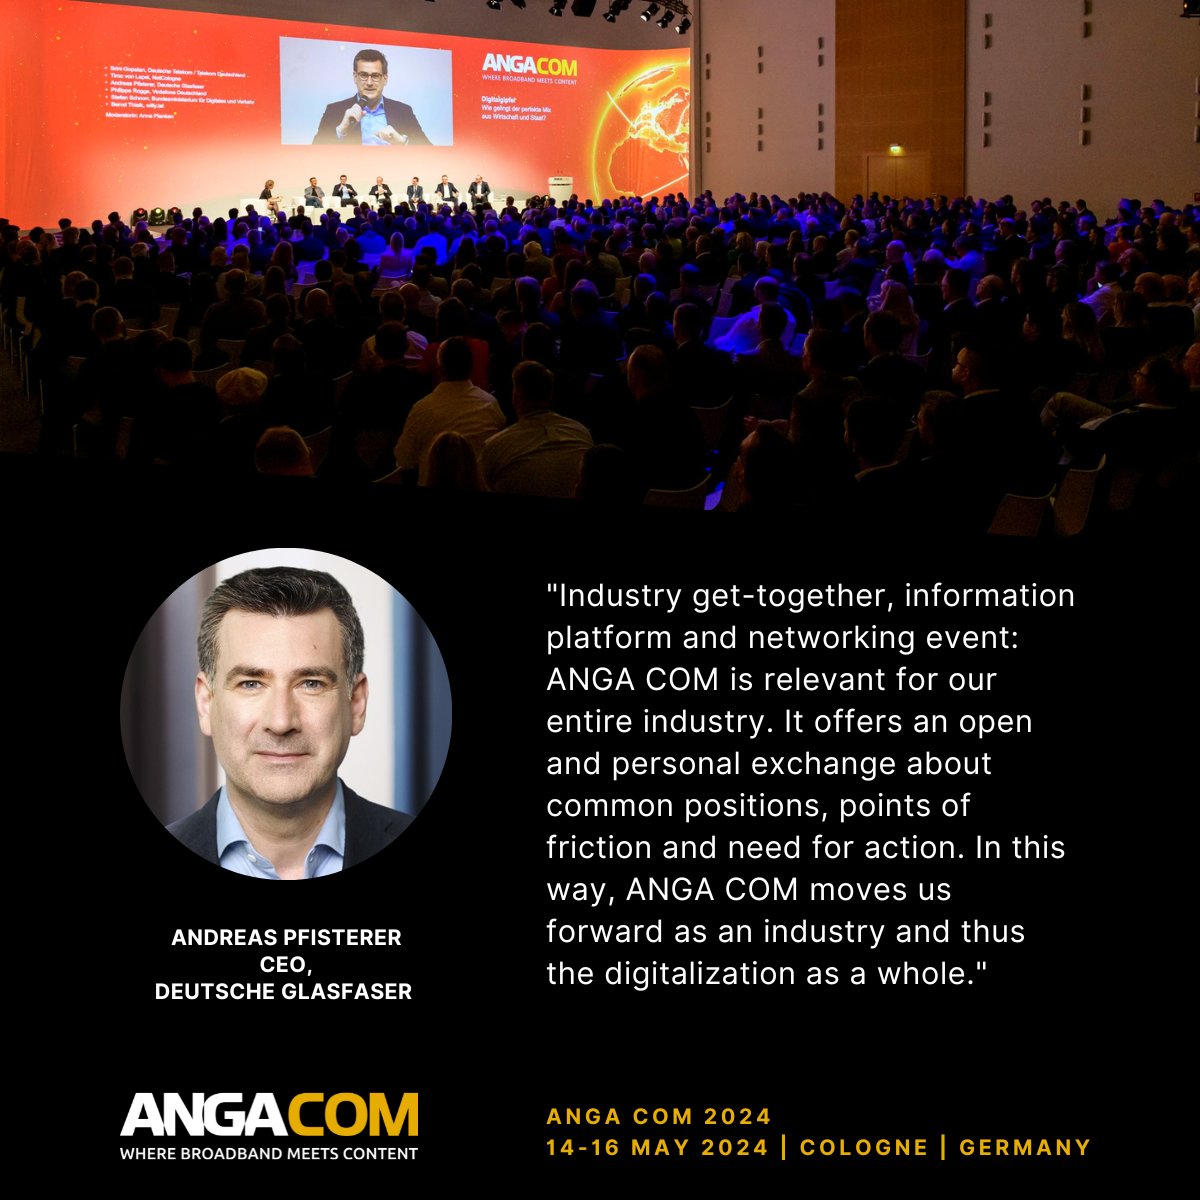 Andreas Pfisterer, CEO @DtGlasfaser on #ANGACOM 2023: 'Industry get-together, information platform and networking event: ANGA COM is relevant for our entire industry...' Read the complete statement and more voices from the #broadband and #media industry: tinyurl.com/5bts4k5b